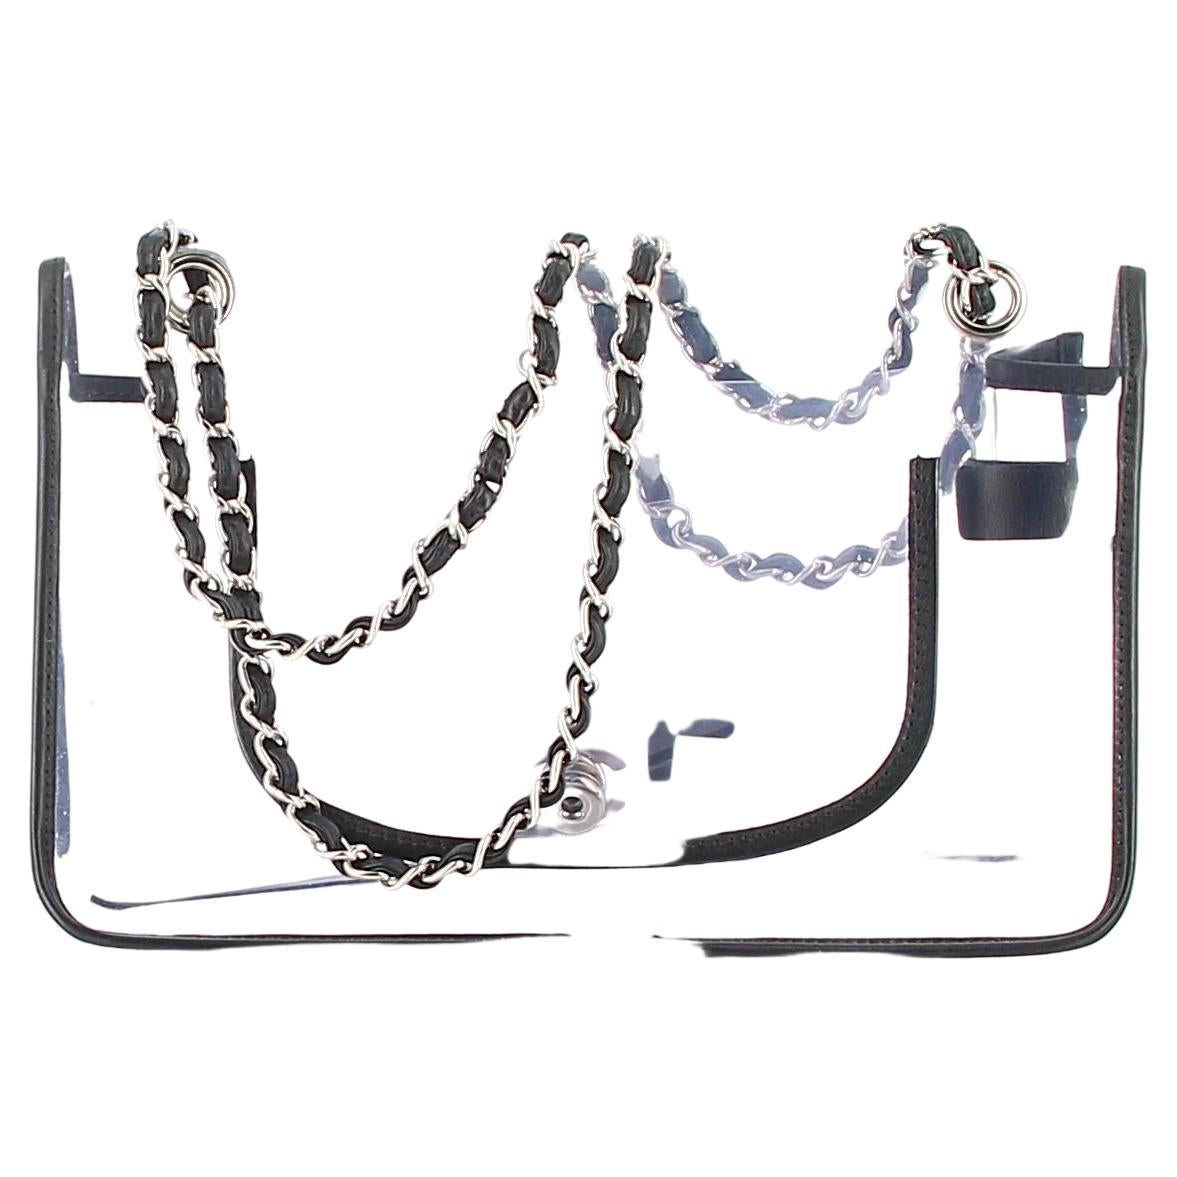 Chanel 2.55 Transparent Classic Flap
REALLY GOOD PREOWNED condition, this one has very slight traces of wear that appeared with time.
Black lamb leather piping. The black lambskin chain intertwined with Chain,
Height 18 cm / 7 